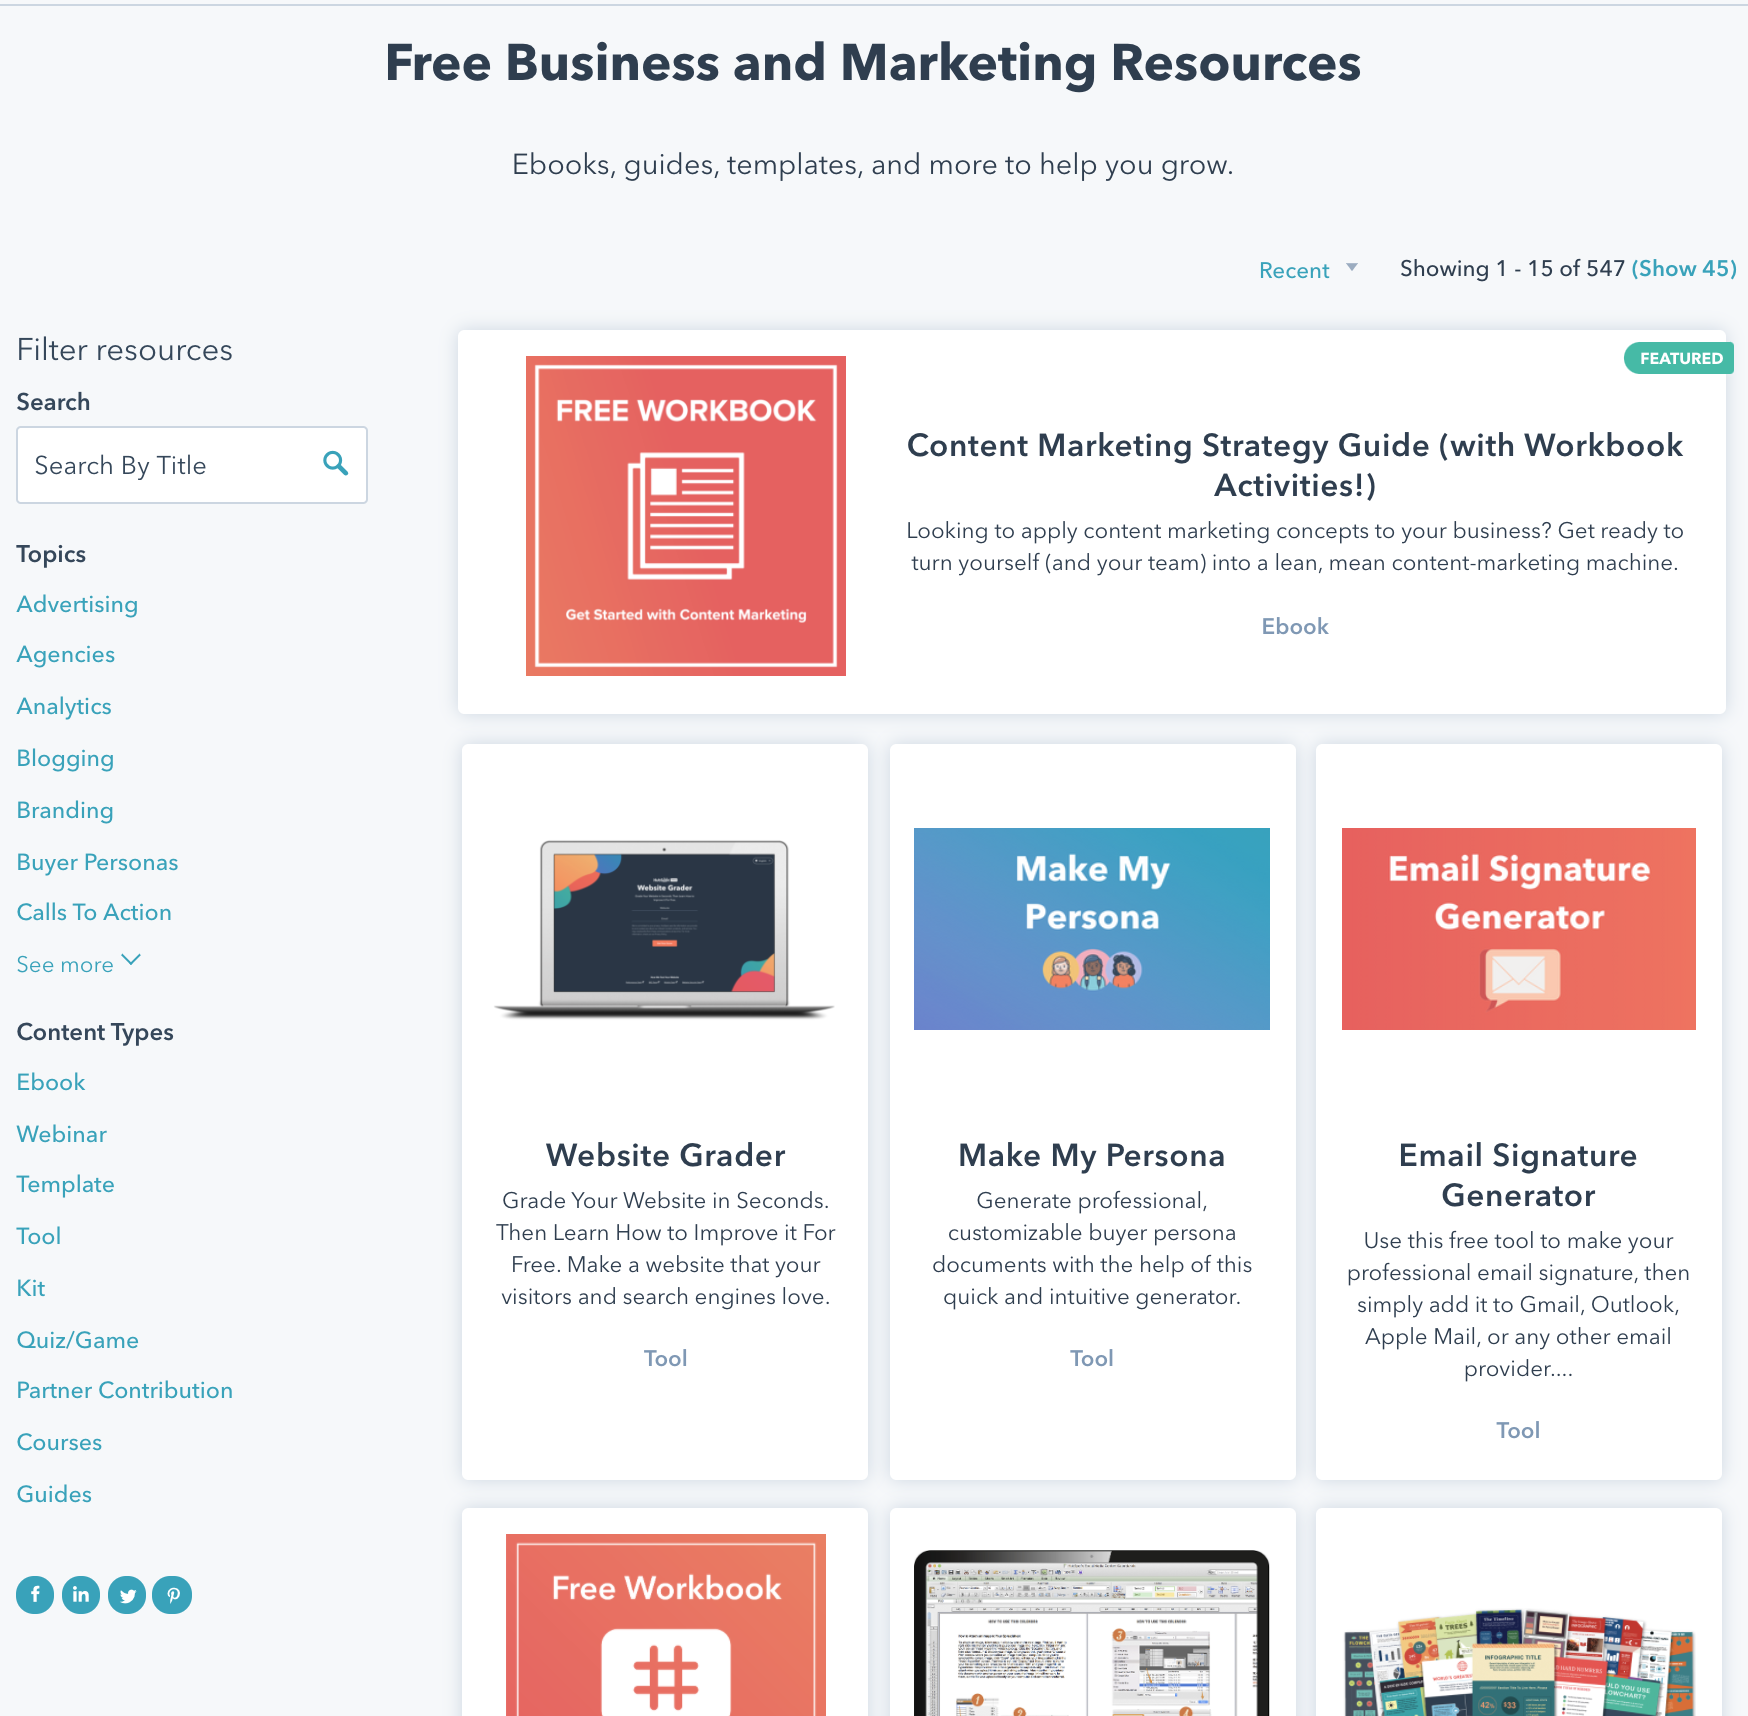 HubSpot free resources including ebooks, tools, guides and more